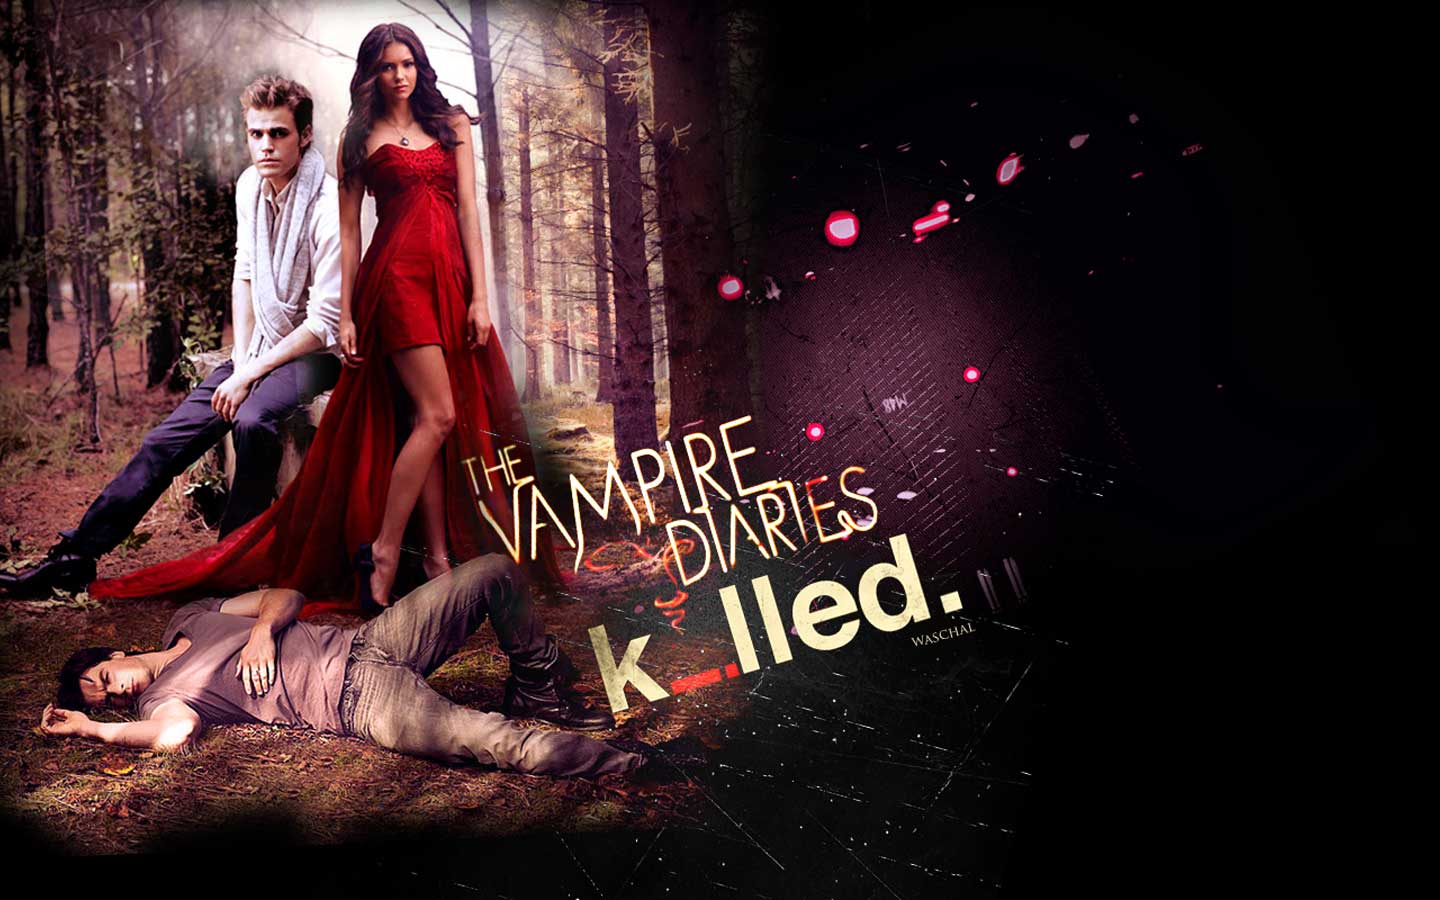 The Vampire Diaries Killed Exclusive HD Wallpapers #1423